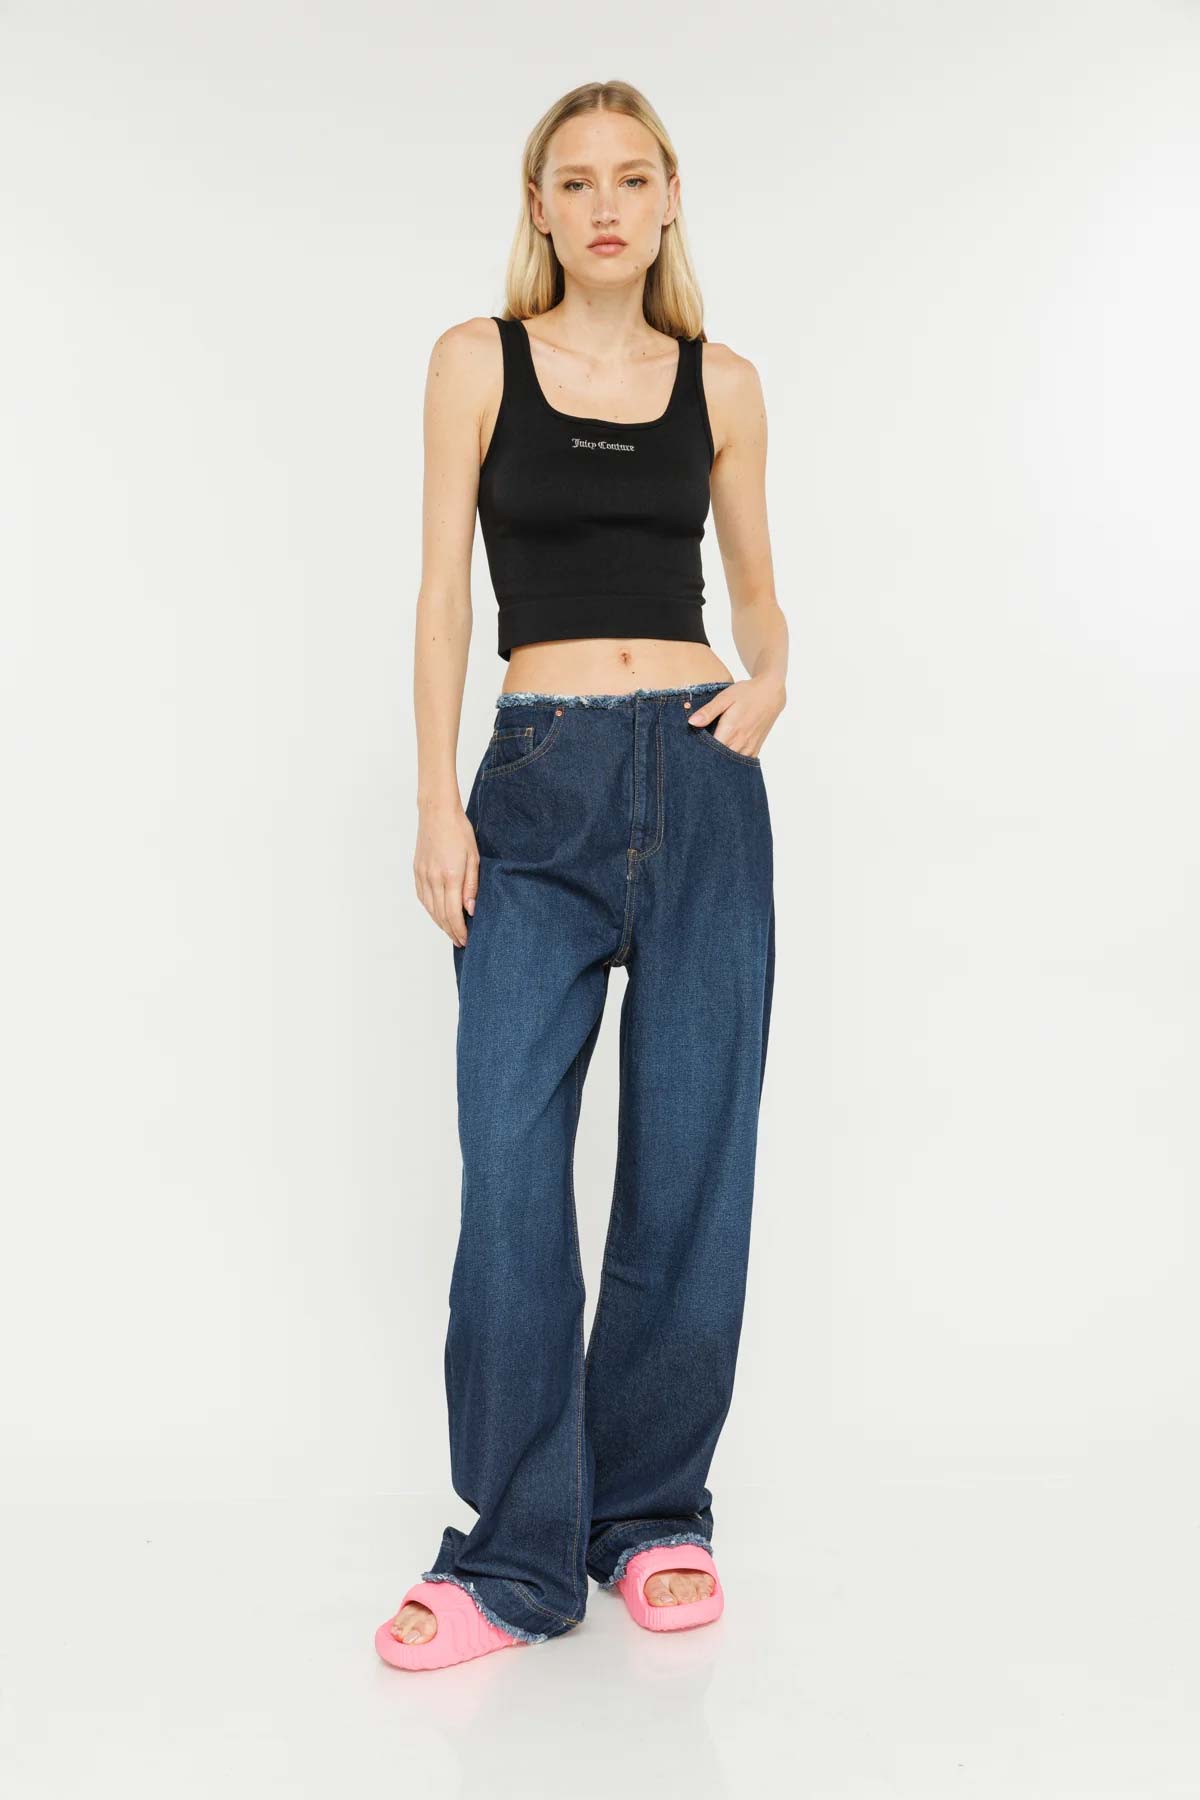 Juicy Couture ג'ינס Mid Wide Leg בצבע כחול כהה-Juicy Couture-34-נאקו